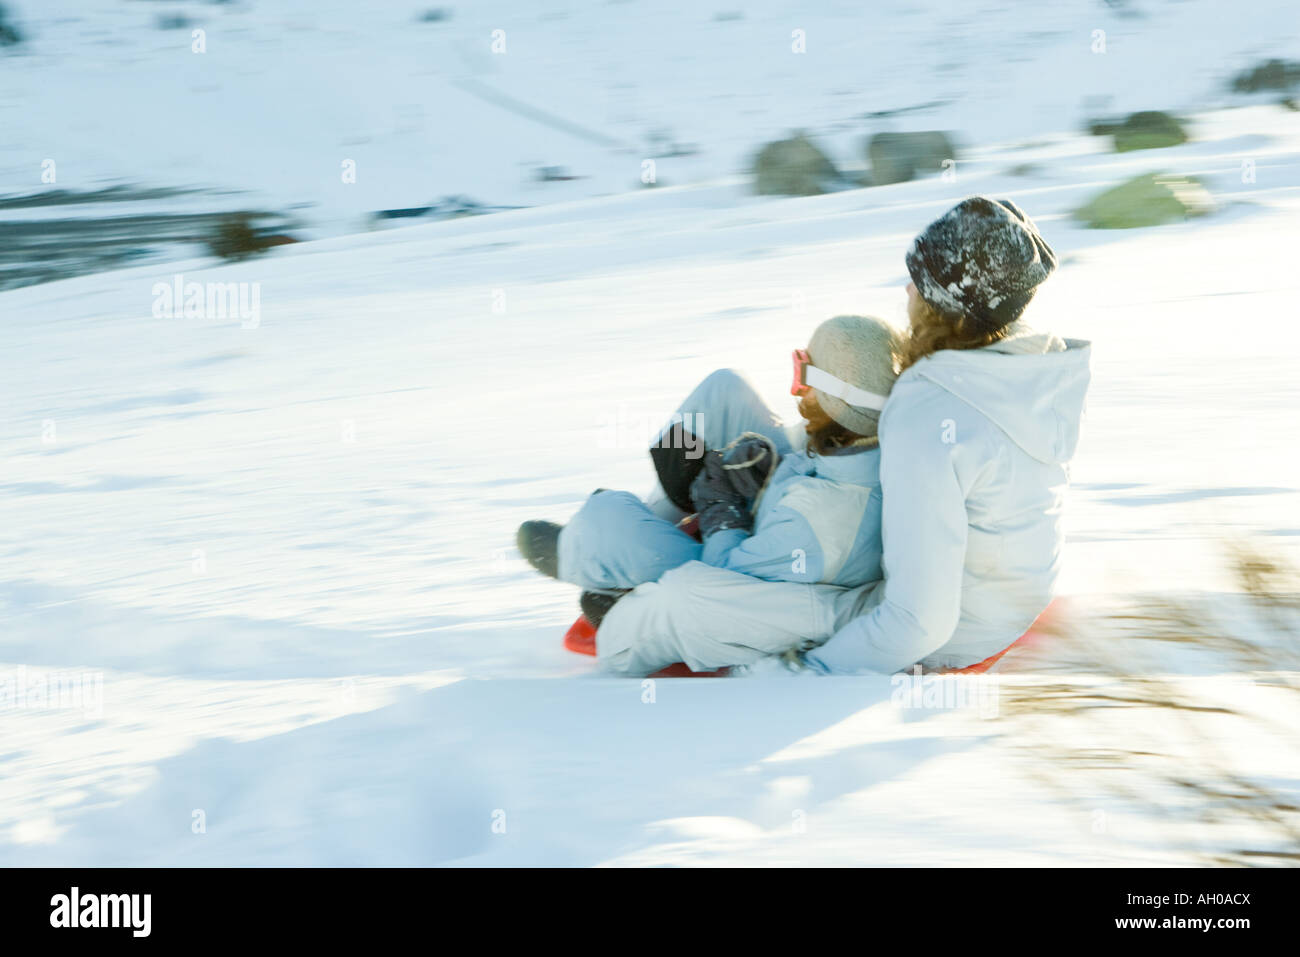 Young friends sledding down hill together, blurred motion Stock Photo